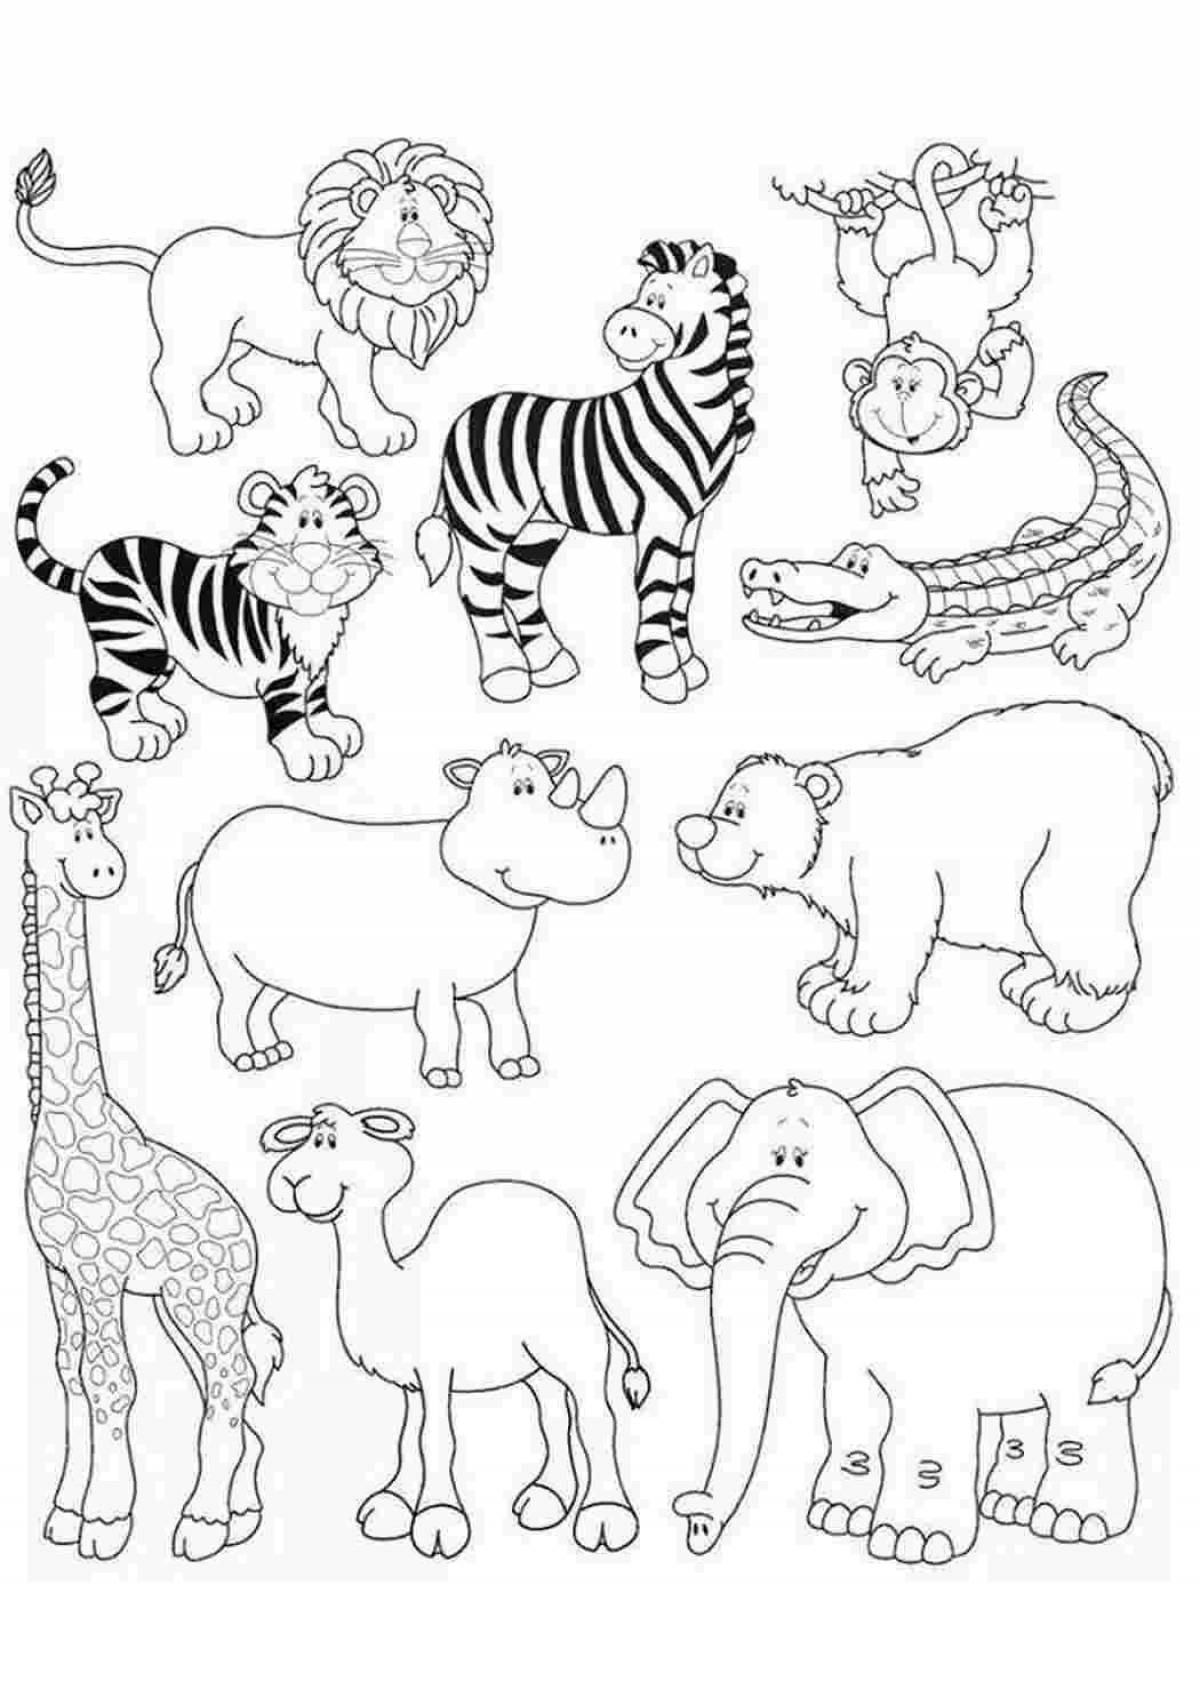 African animals for kids #8